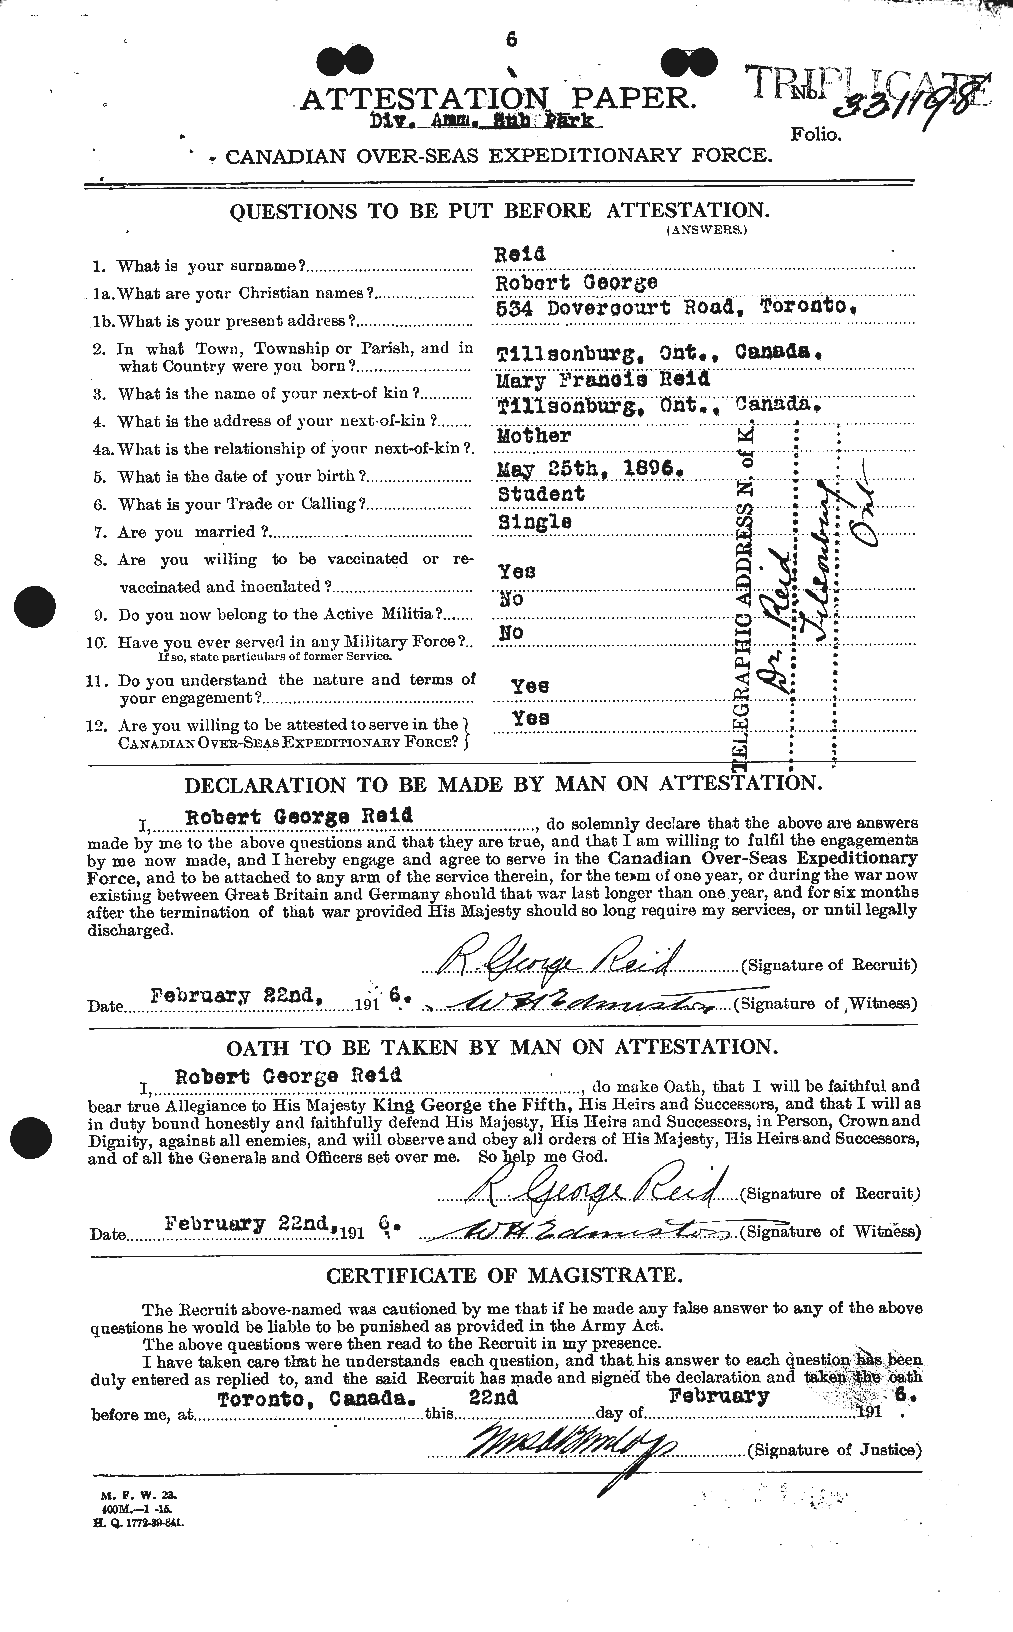 Personnel Records of the First World War - CEF 601901a